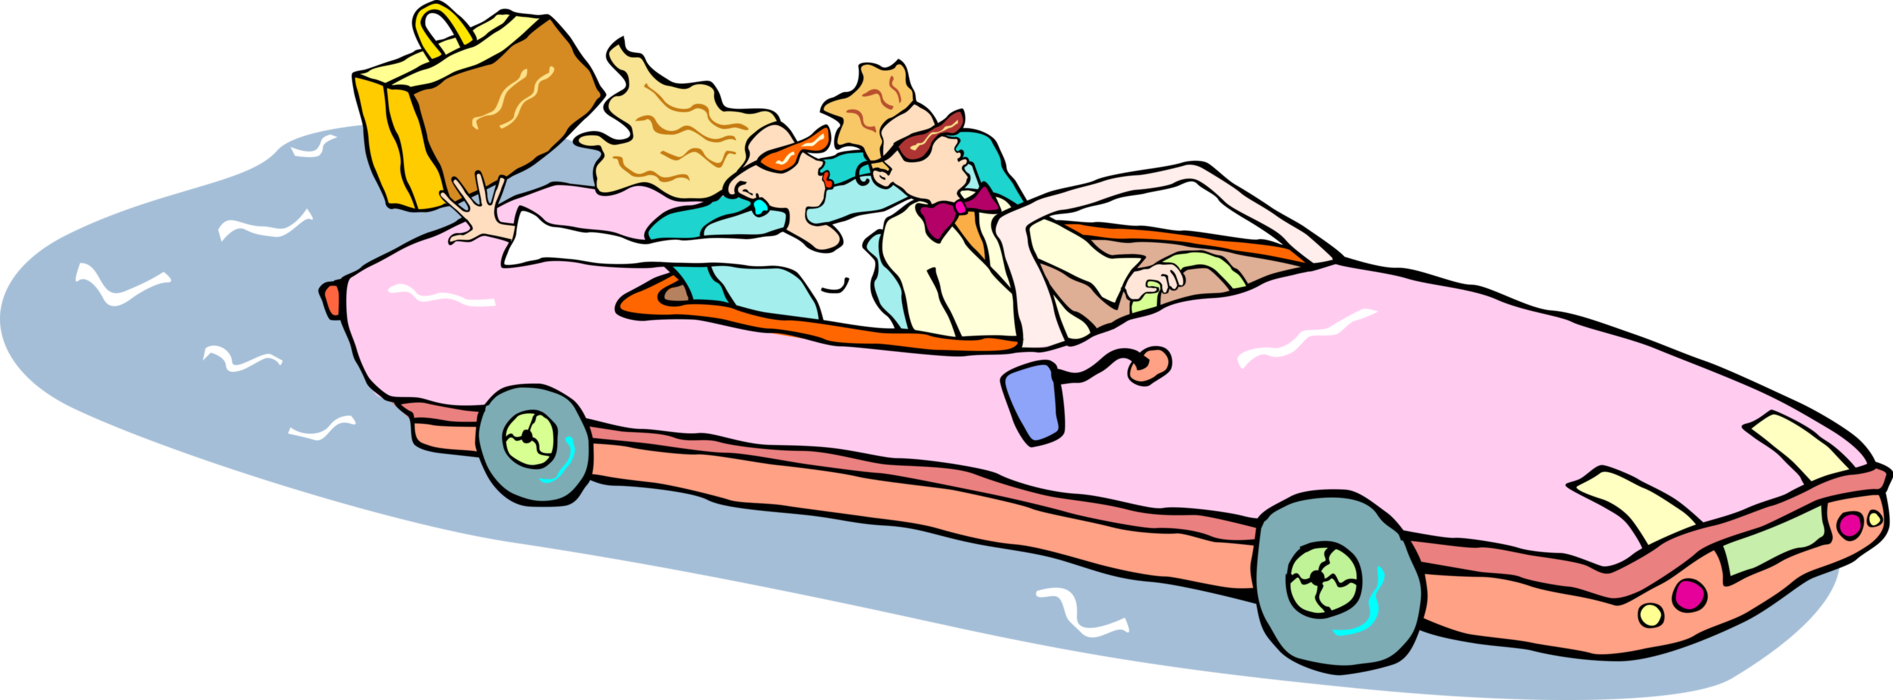 Vector Illustration of Sports Car Convertible with Young Couple on Holiday Vacation with Luggage